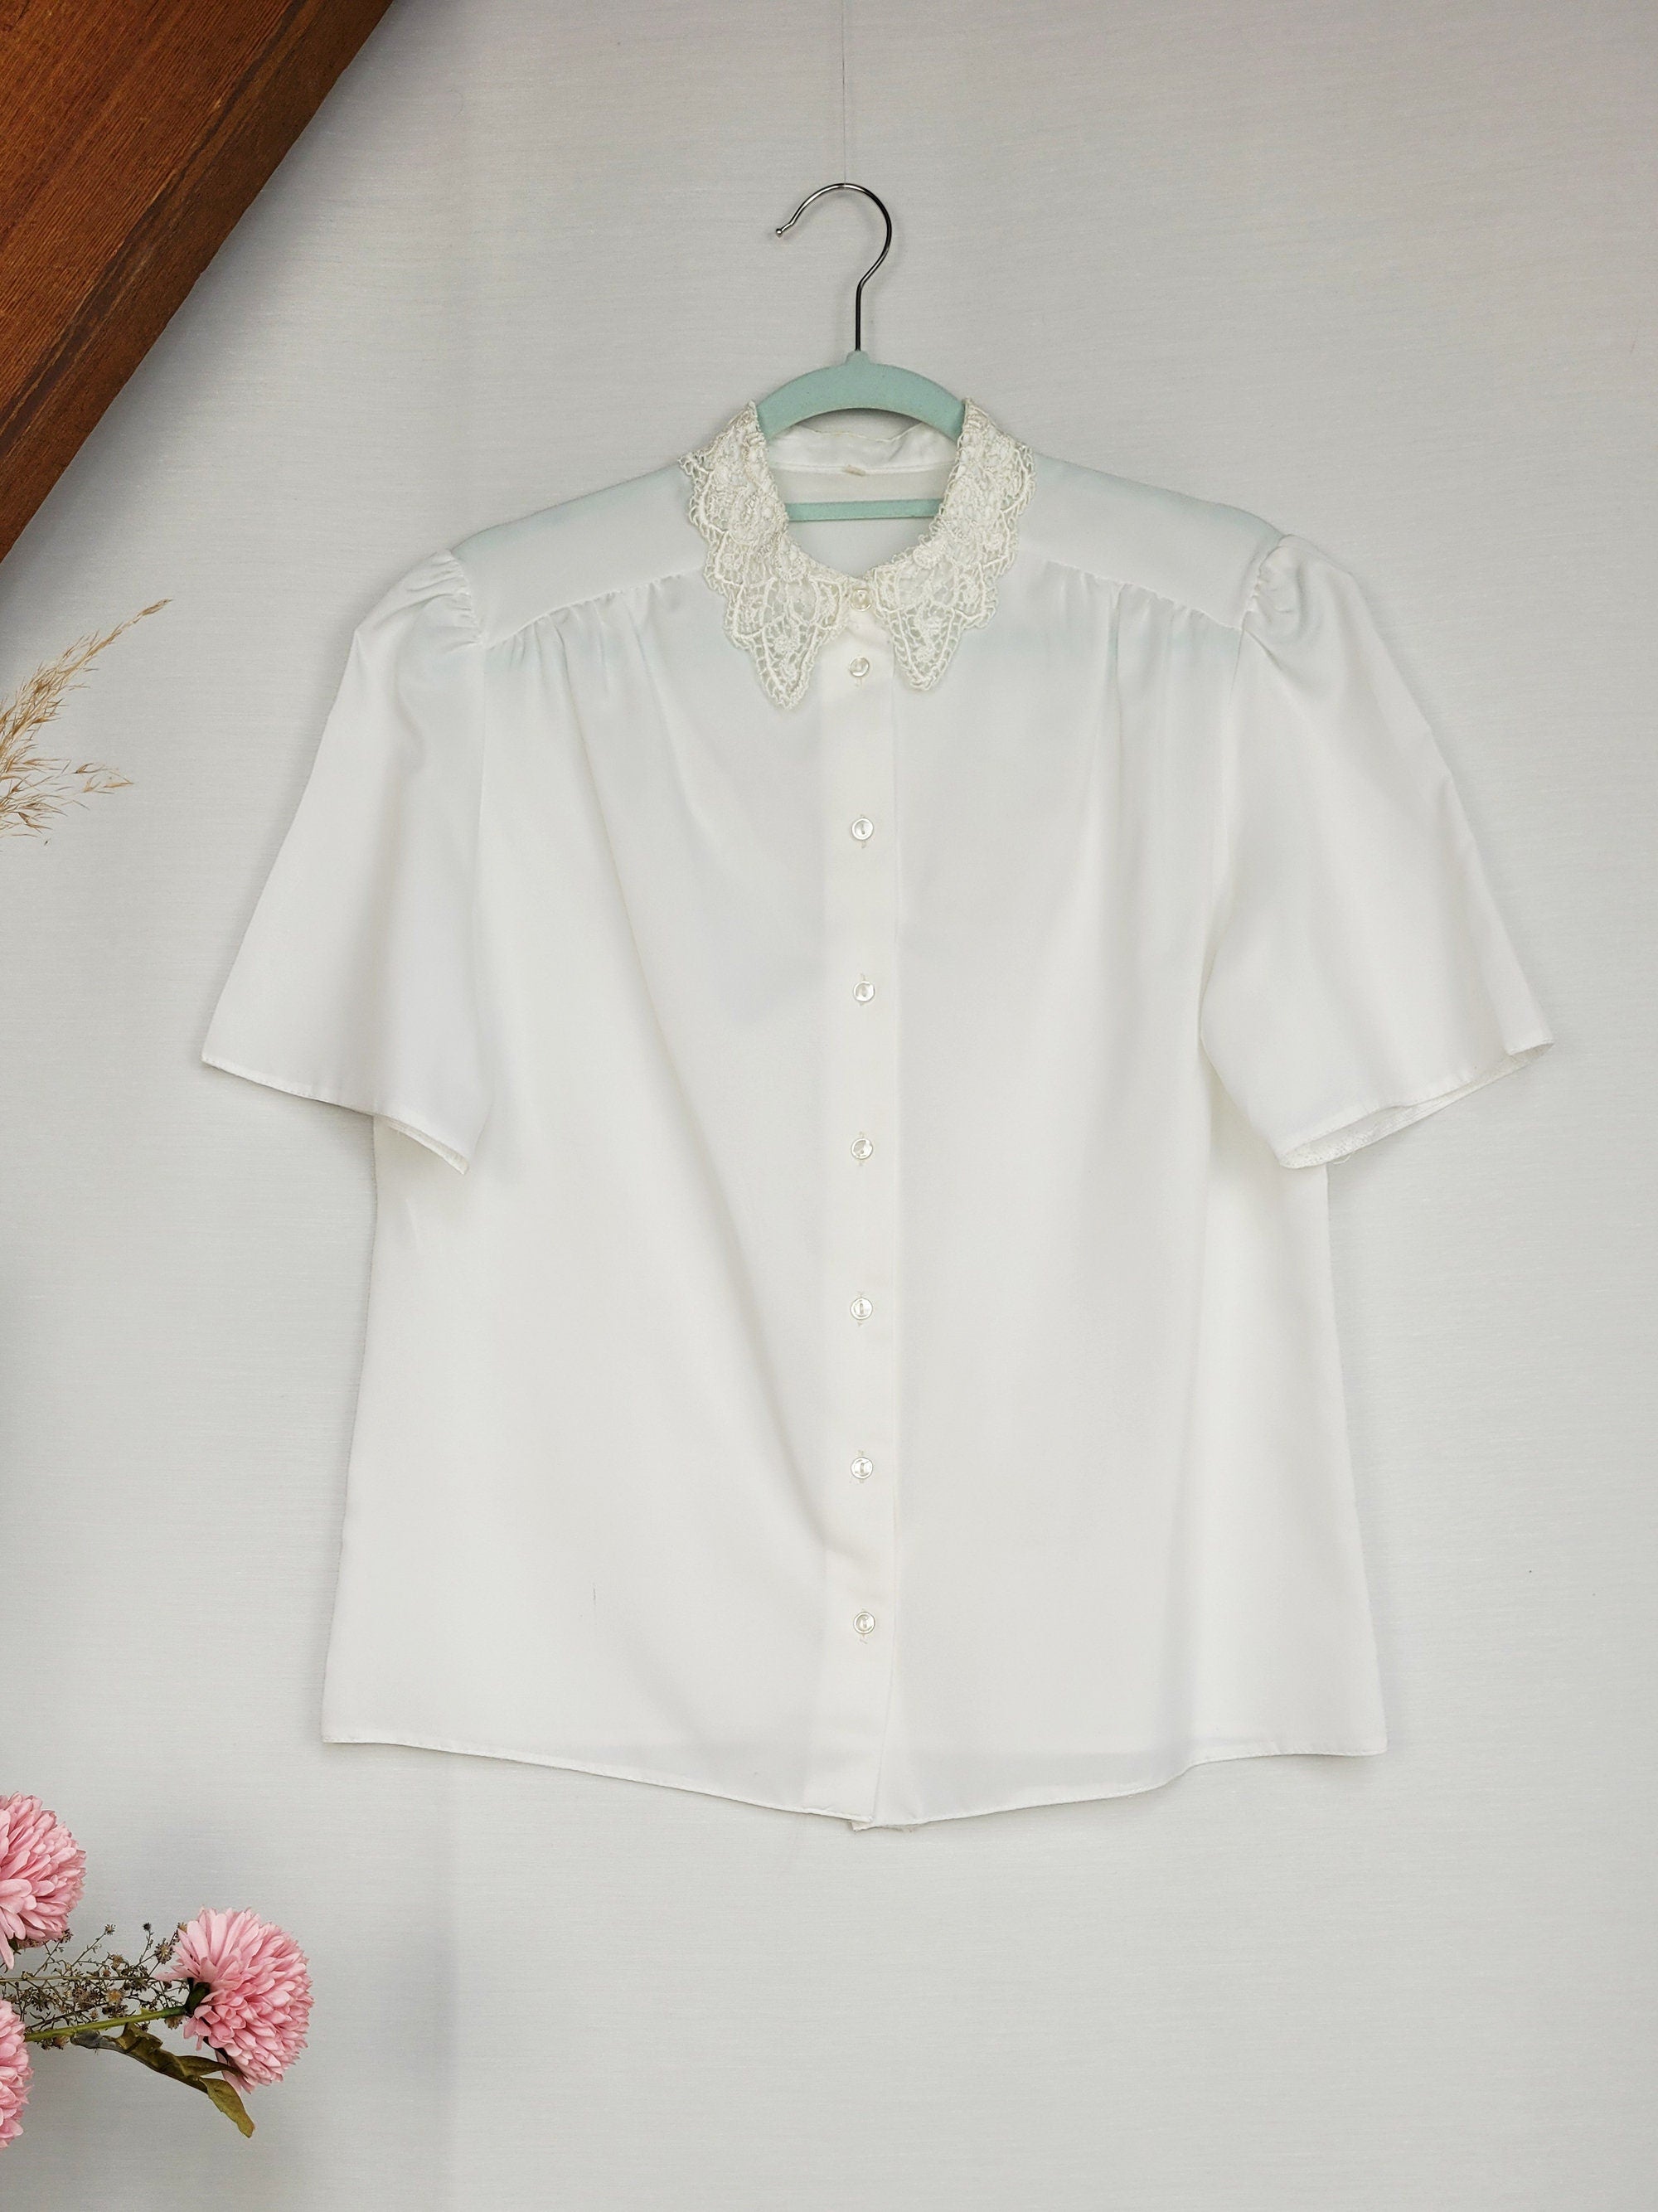 Vintage 80s white lace collar short sleeve blouse top